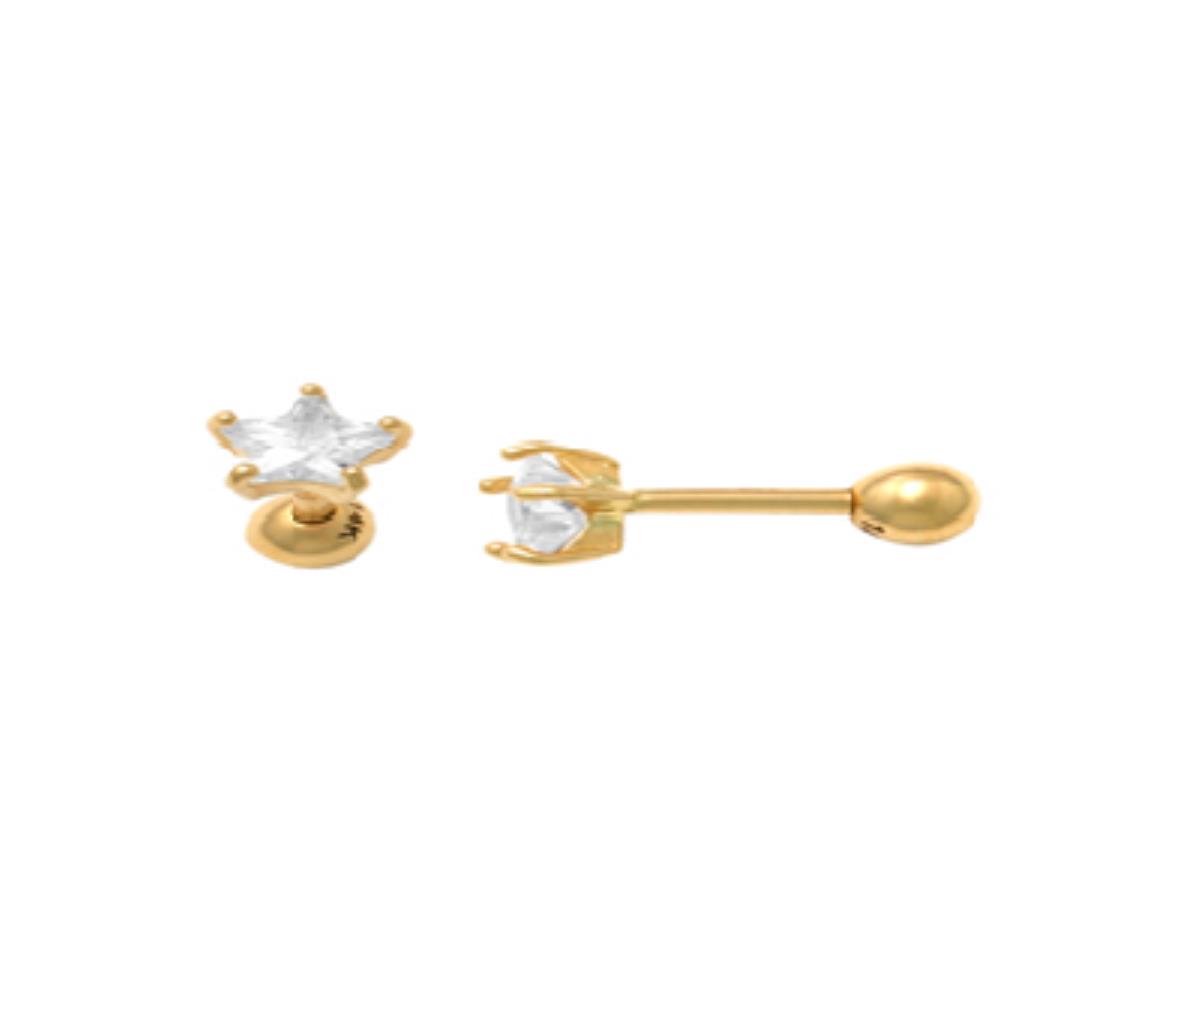 14K Yellow Gold 4mm Star Cut Solitaire Ear/Nose Stud with Ball Screw-Back